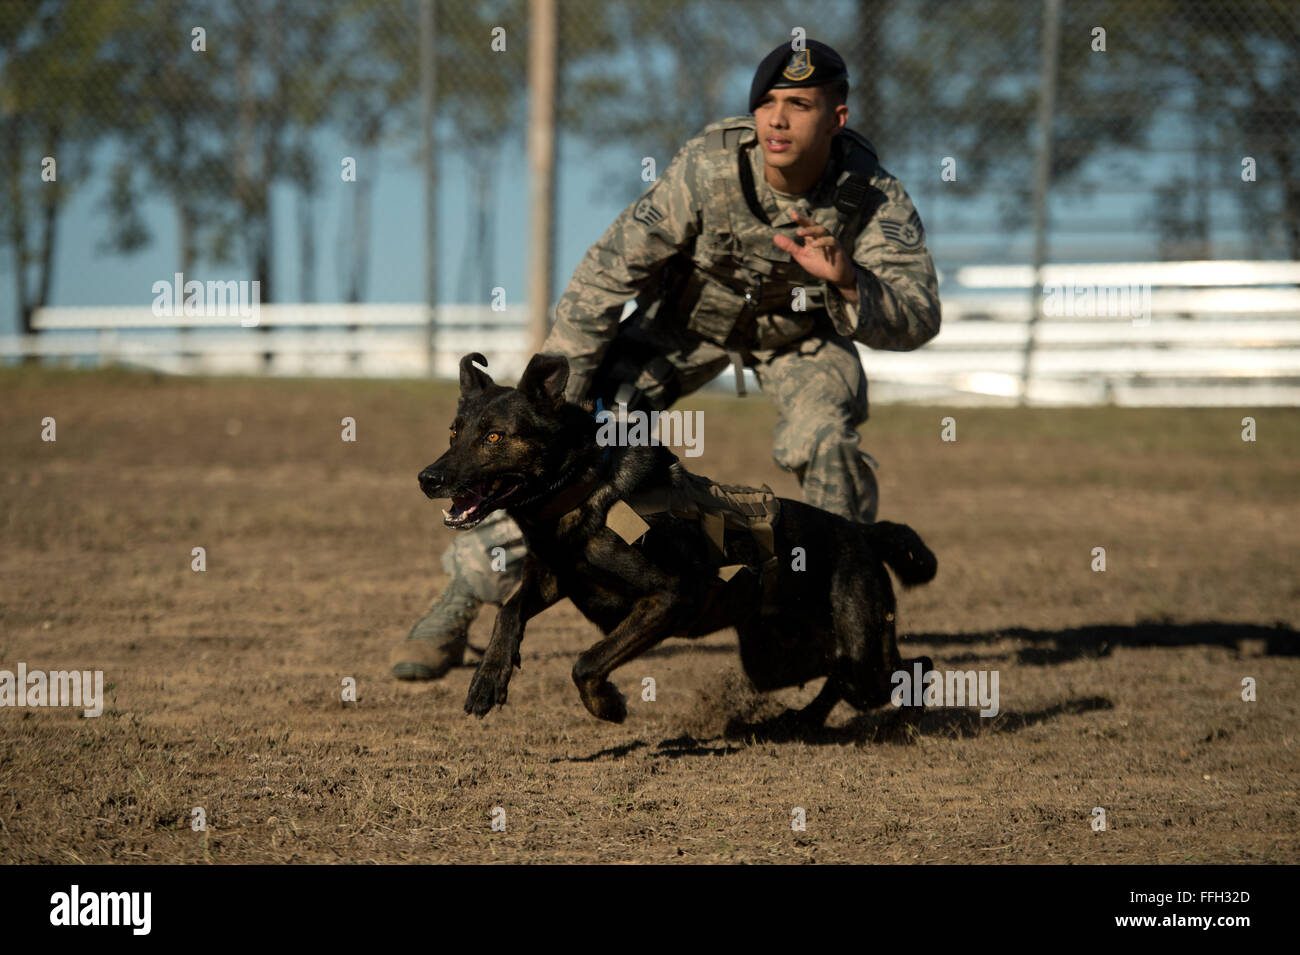 Staff Sgt. Mark Devine, a military working dog handler from the 802nd Security Forces Squadron, releases JJany during a controlled aggression exercise at Joint Base San Antonio-Lackland. Devine and military working dog handlers assigned to JBSA-Lackland fulfill daily law enforcement requirements or train to remain mission-ready. Stock Photo